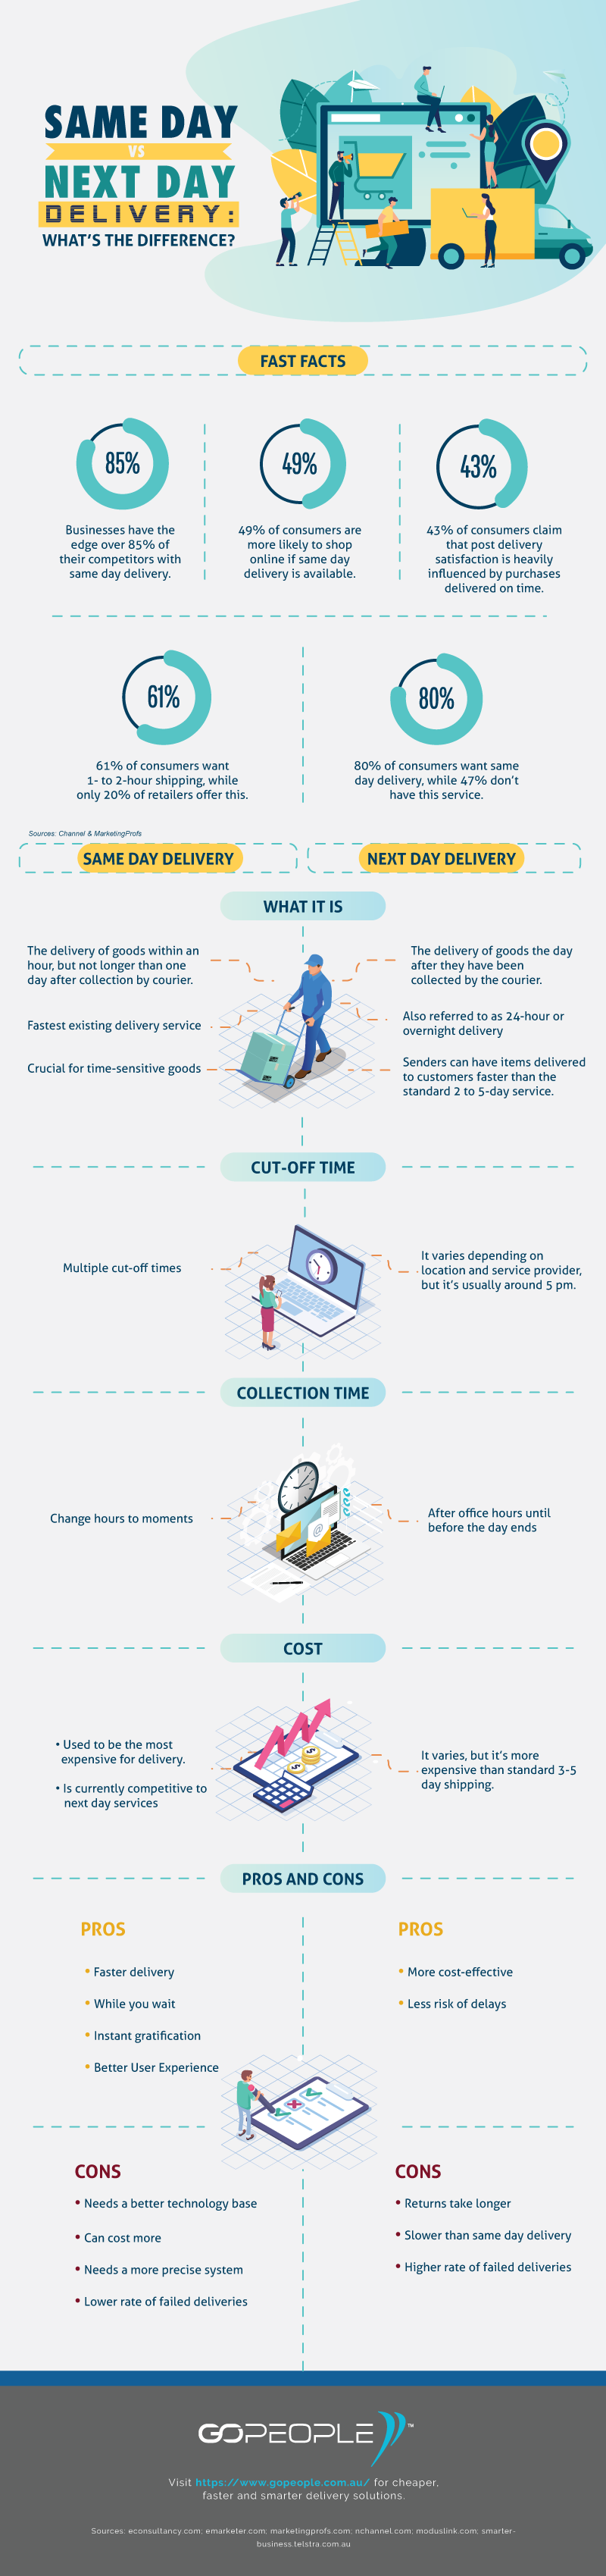 Same Day vs Next Day Delivery ... What's the Difference? (Infographic) - Supply Chain Game Changer™